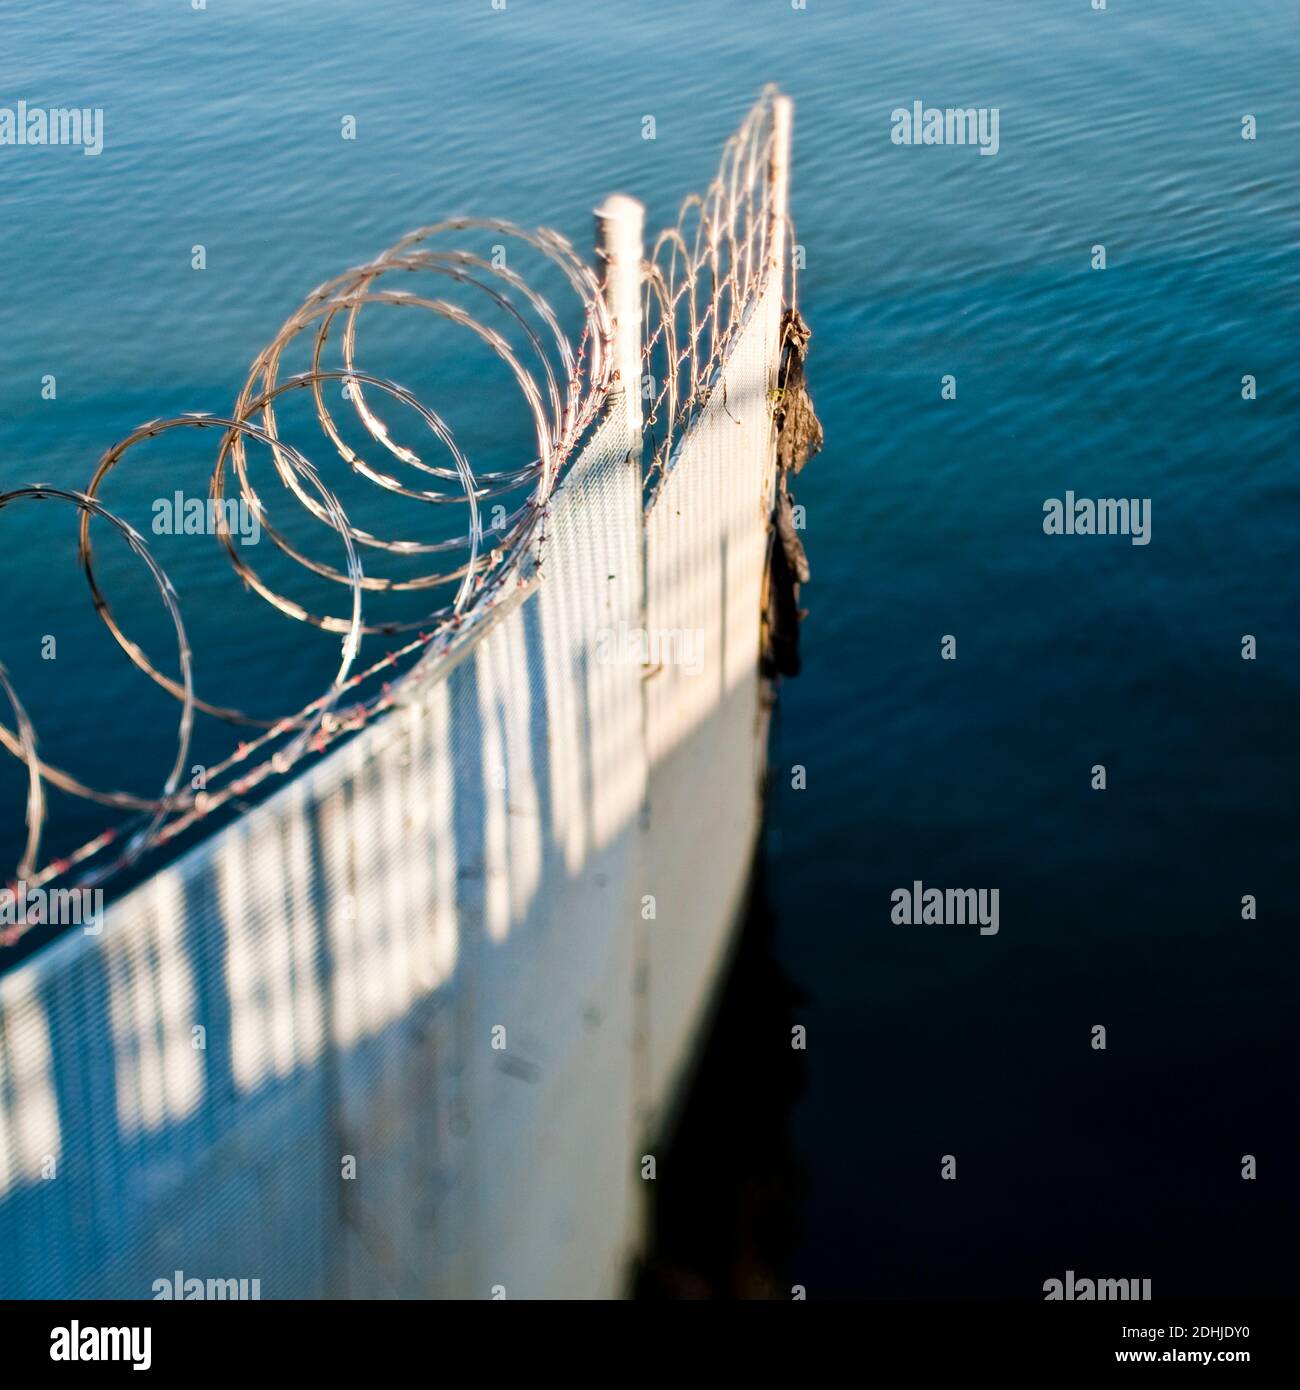 Corrugated iron fence and barbed wire in ocean. Stock Photo